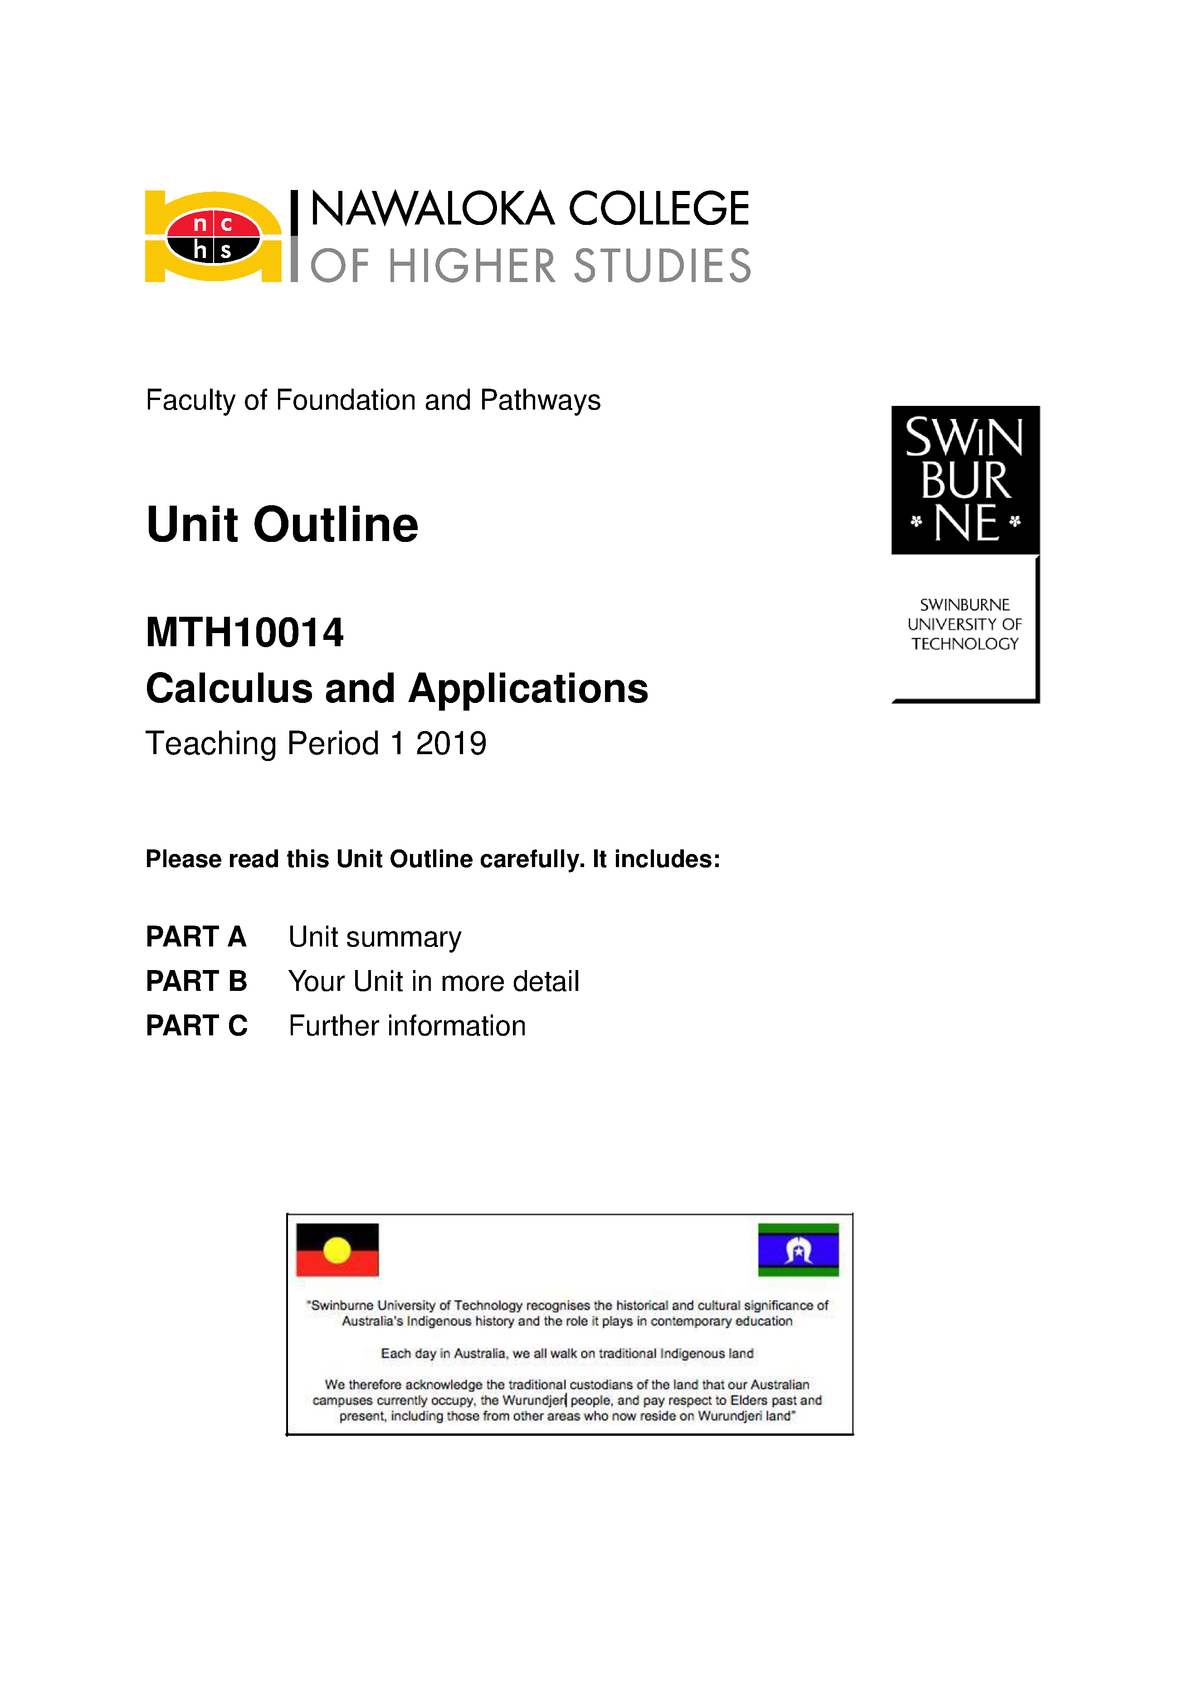 MTH10014 Calculus and Applications Unit Ouline TP1 2019 Faculty of